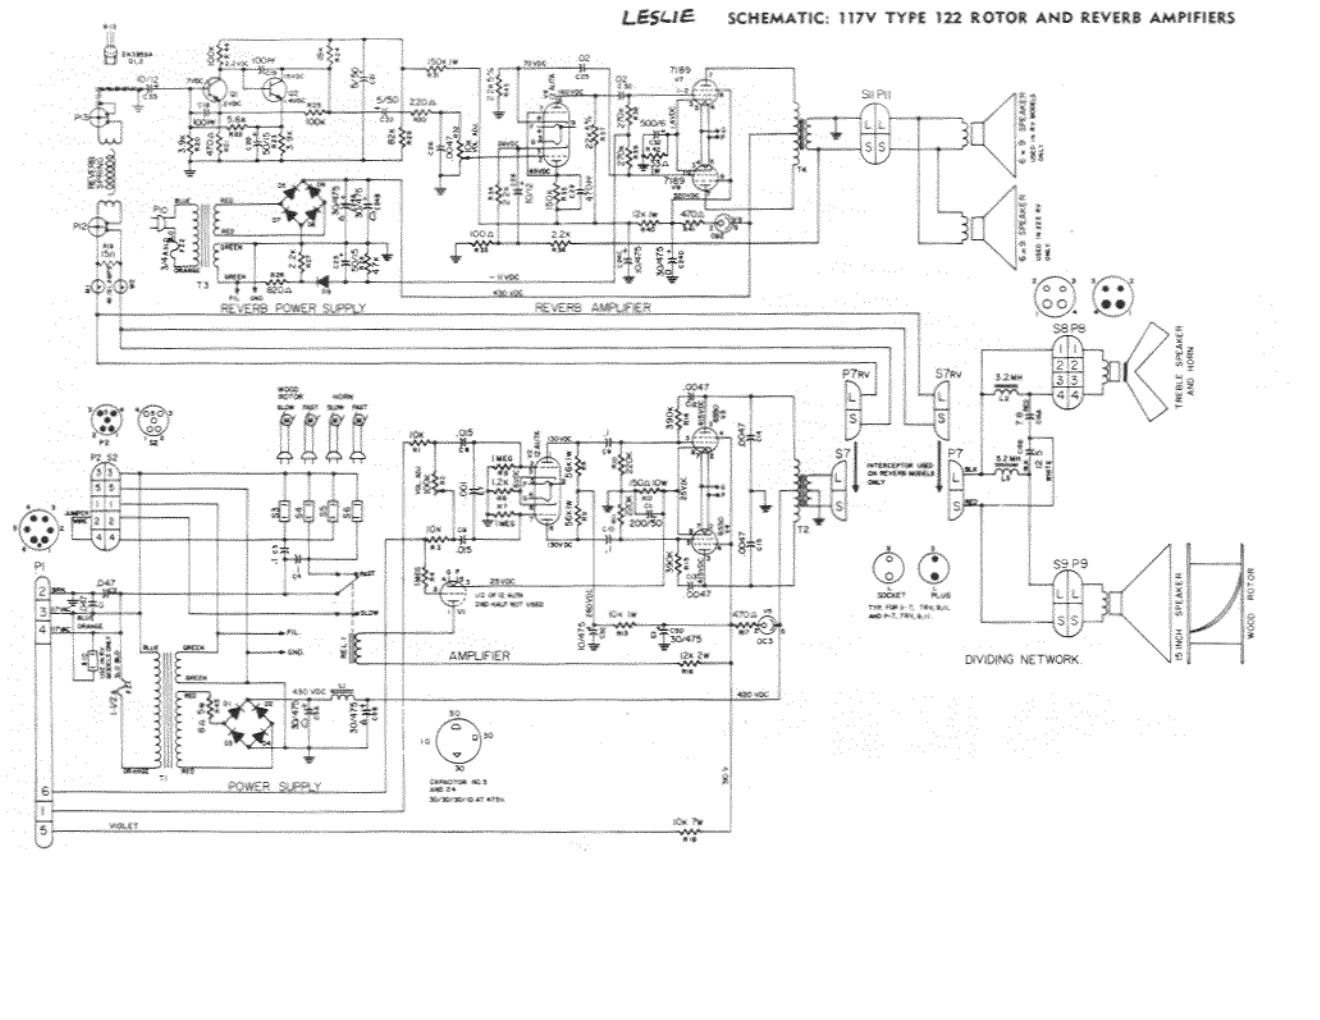 leslie 122 reverb rotor amp schematic